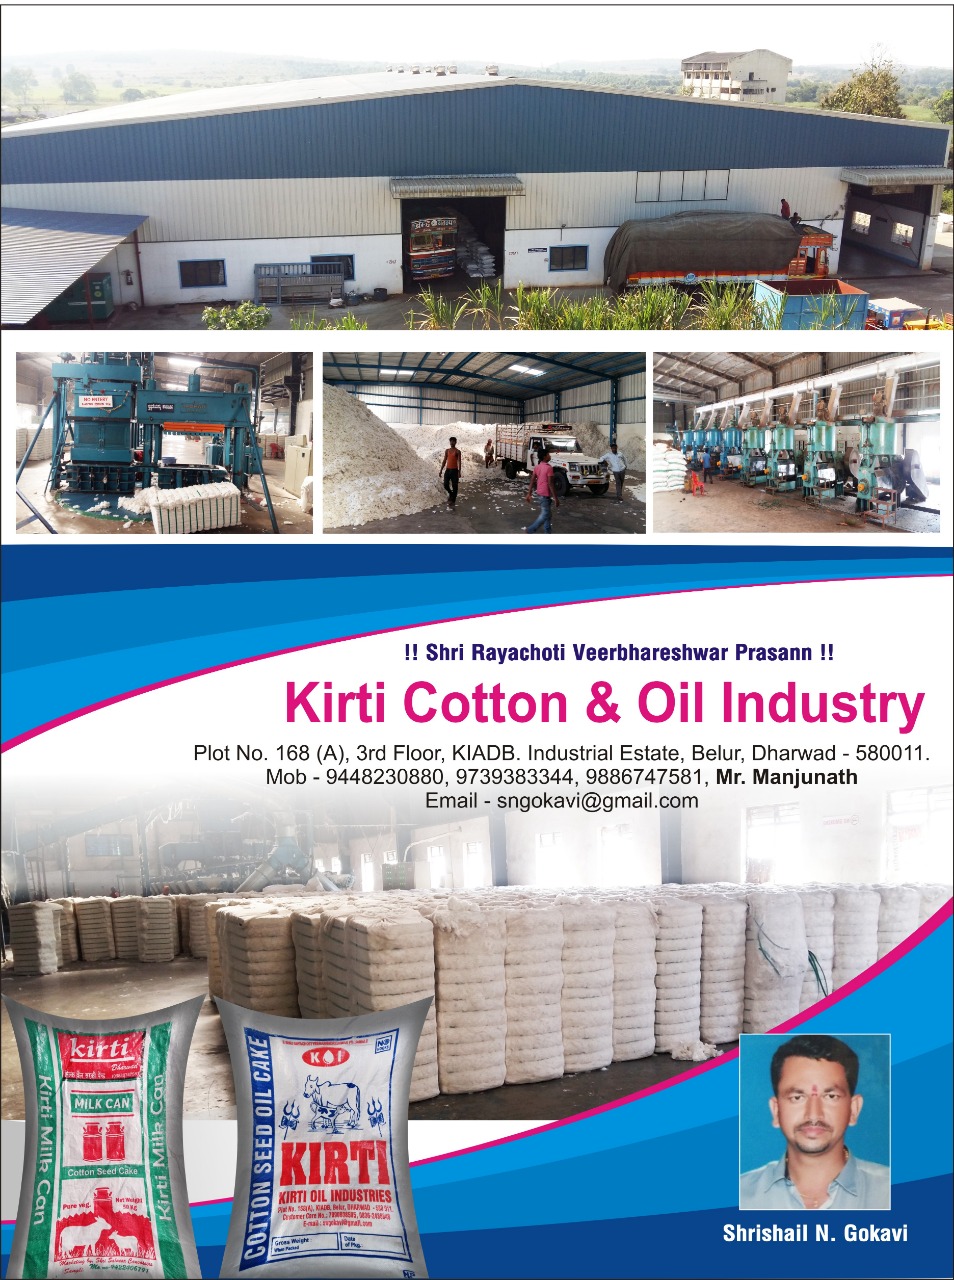 Kirti Cotton and Oil Industries - Cotton Ginning and Pressing